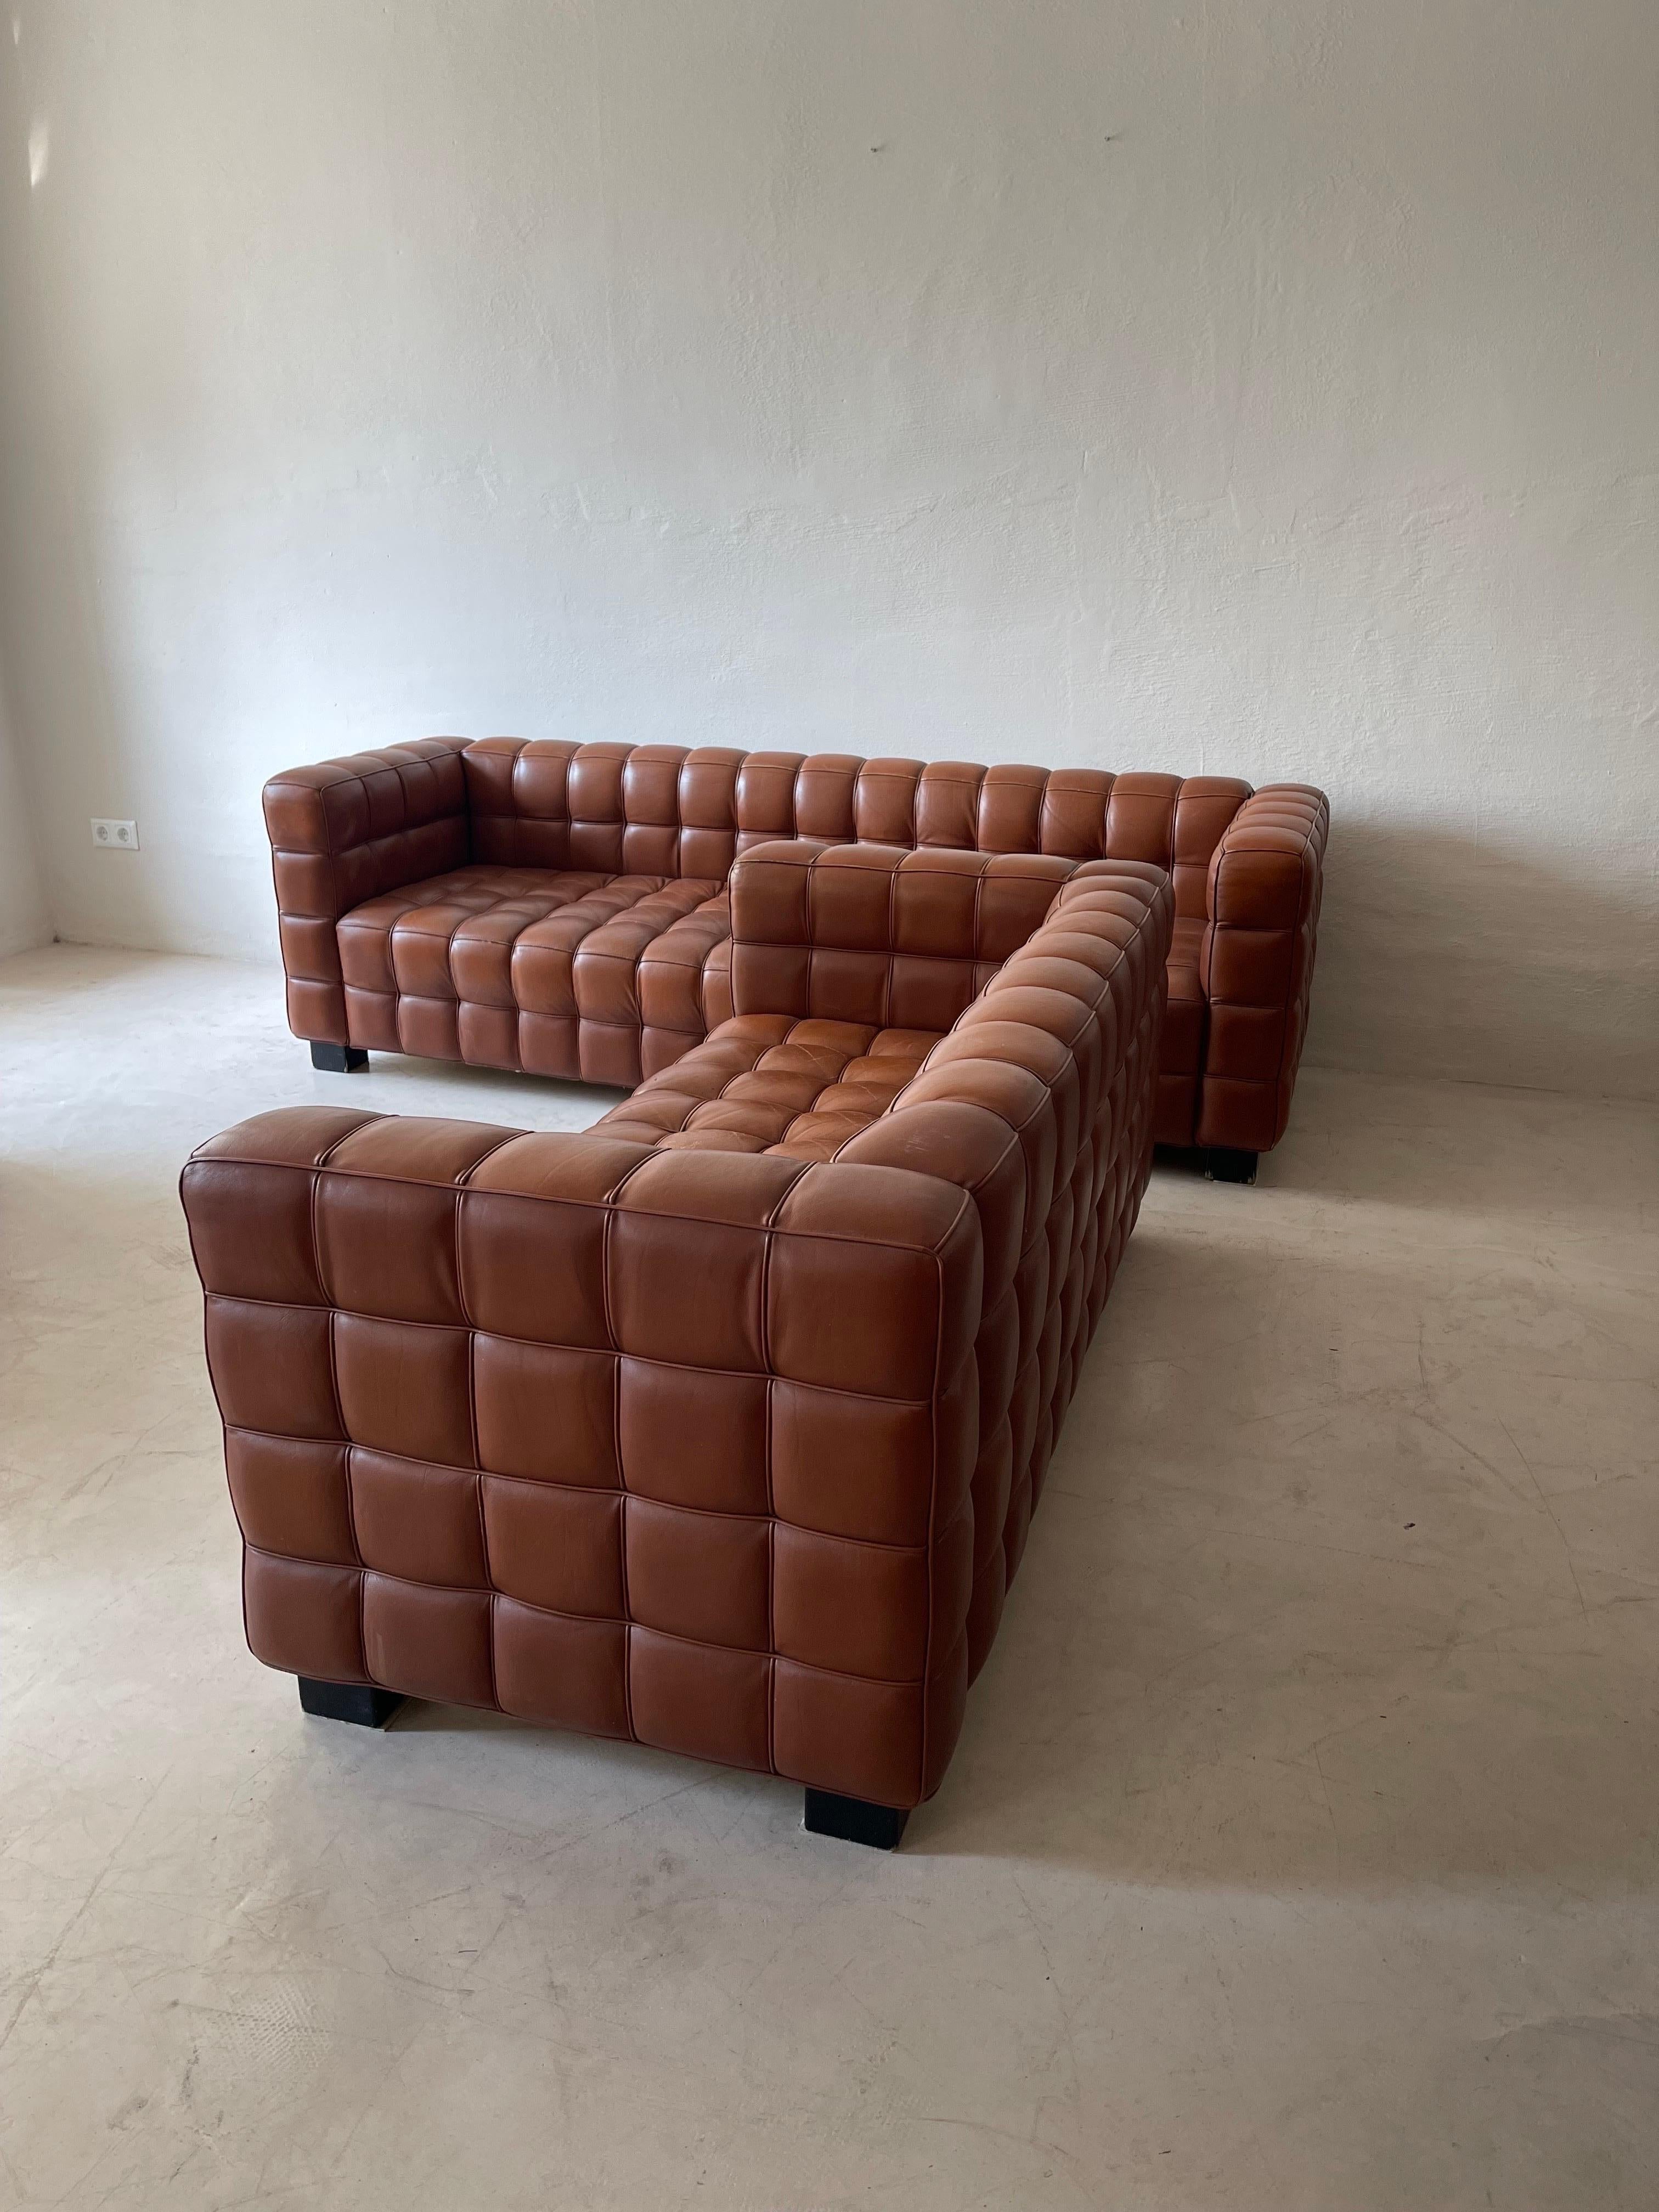 Josef Hoffmann Kubus Sofa in patinated Original Leather by Wittmann, Set of Two  For Sale 1